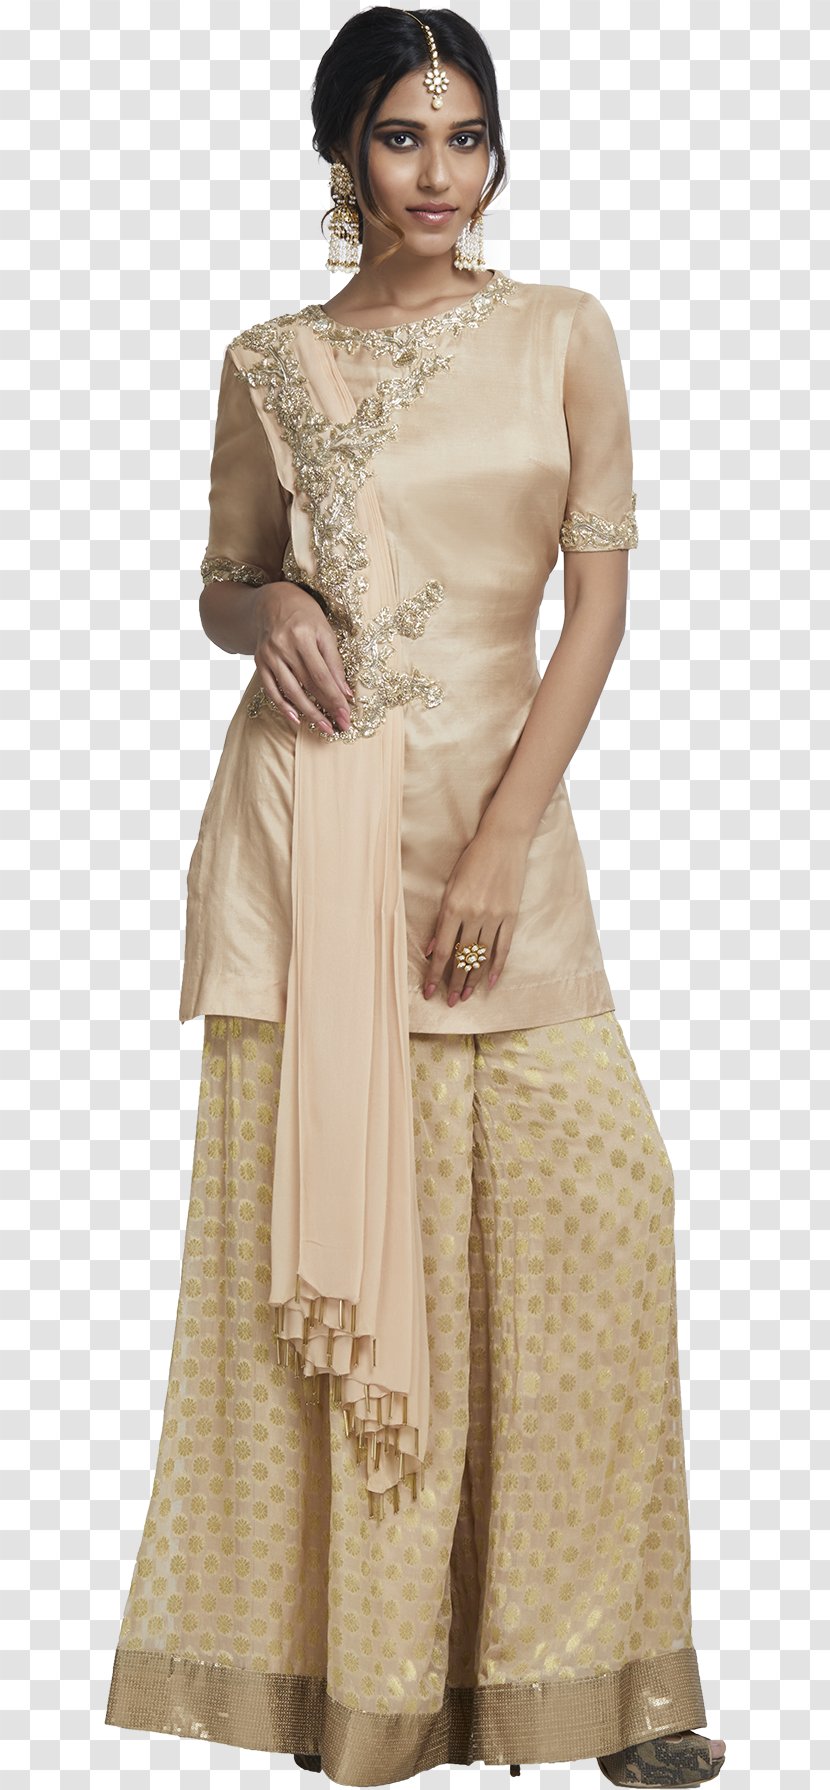 Dress Clothing - Brown - Sleeve Suit Transparent PNG